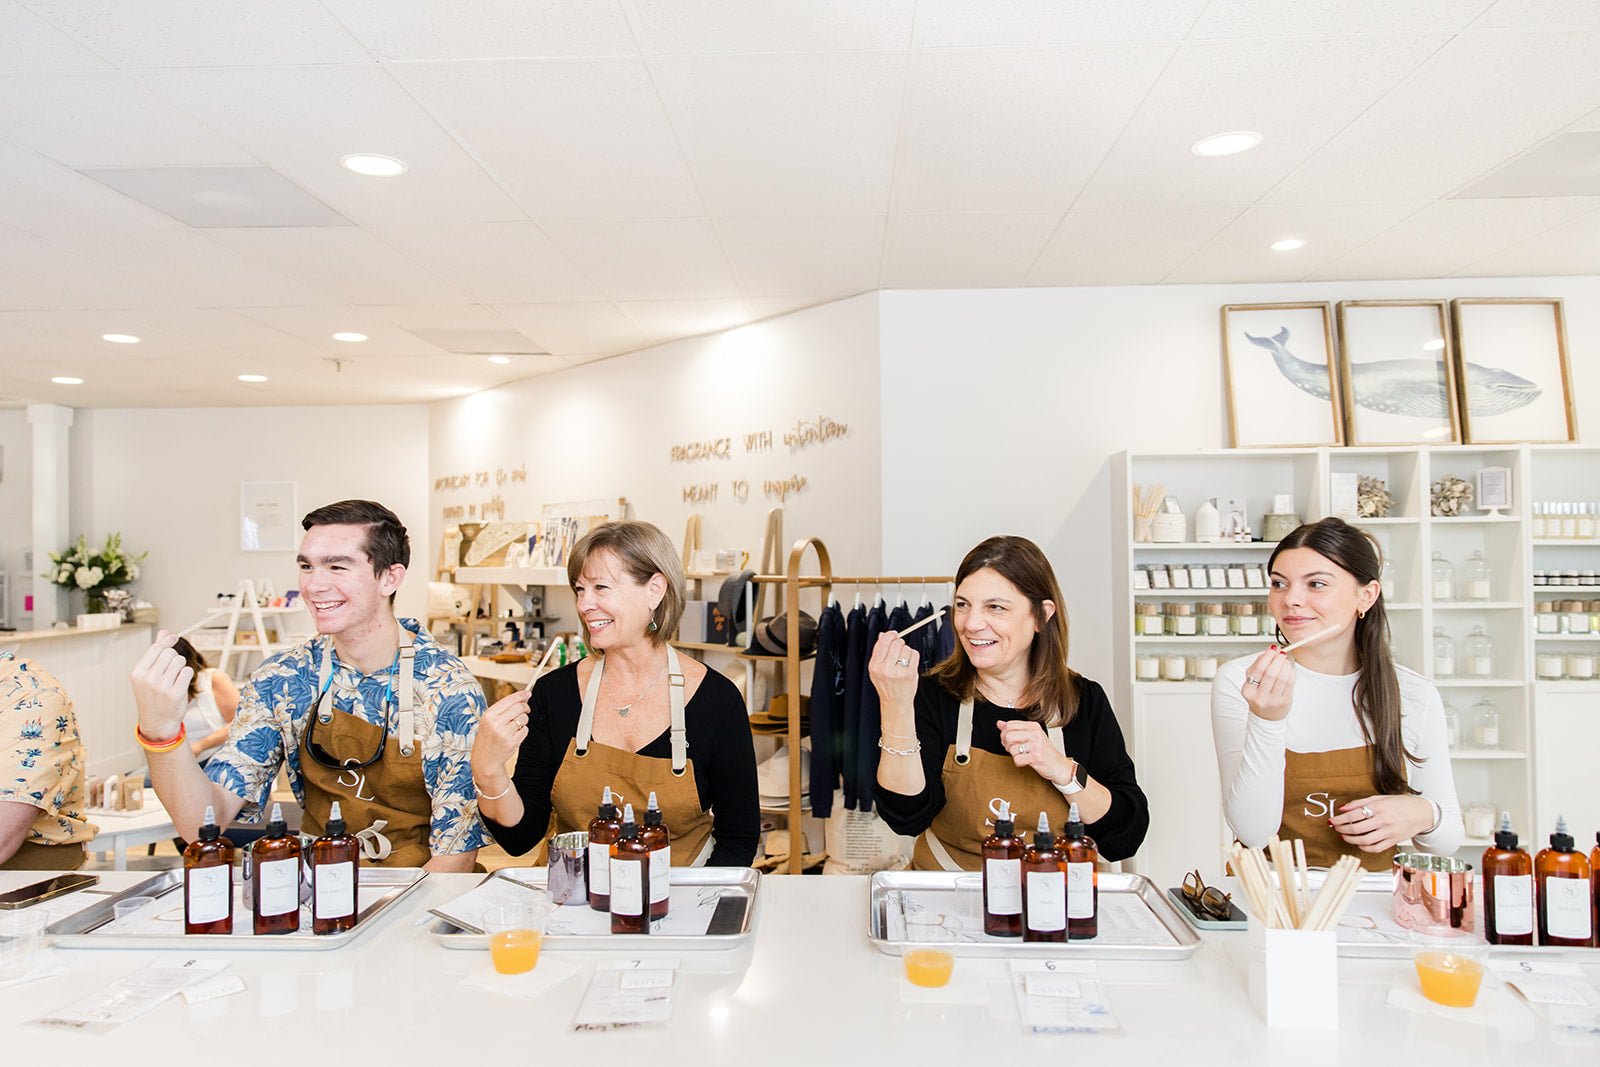 A group of people joyfully engaging in a fragrance blending custom candle experience, with clear glass bottles and mixing tools on the white tables in a bright and modern studio space.